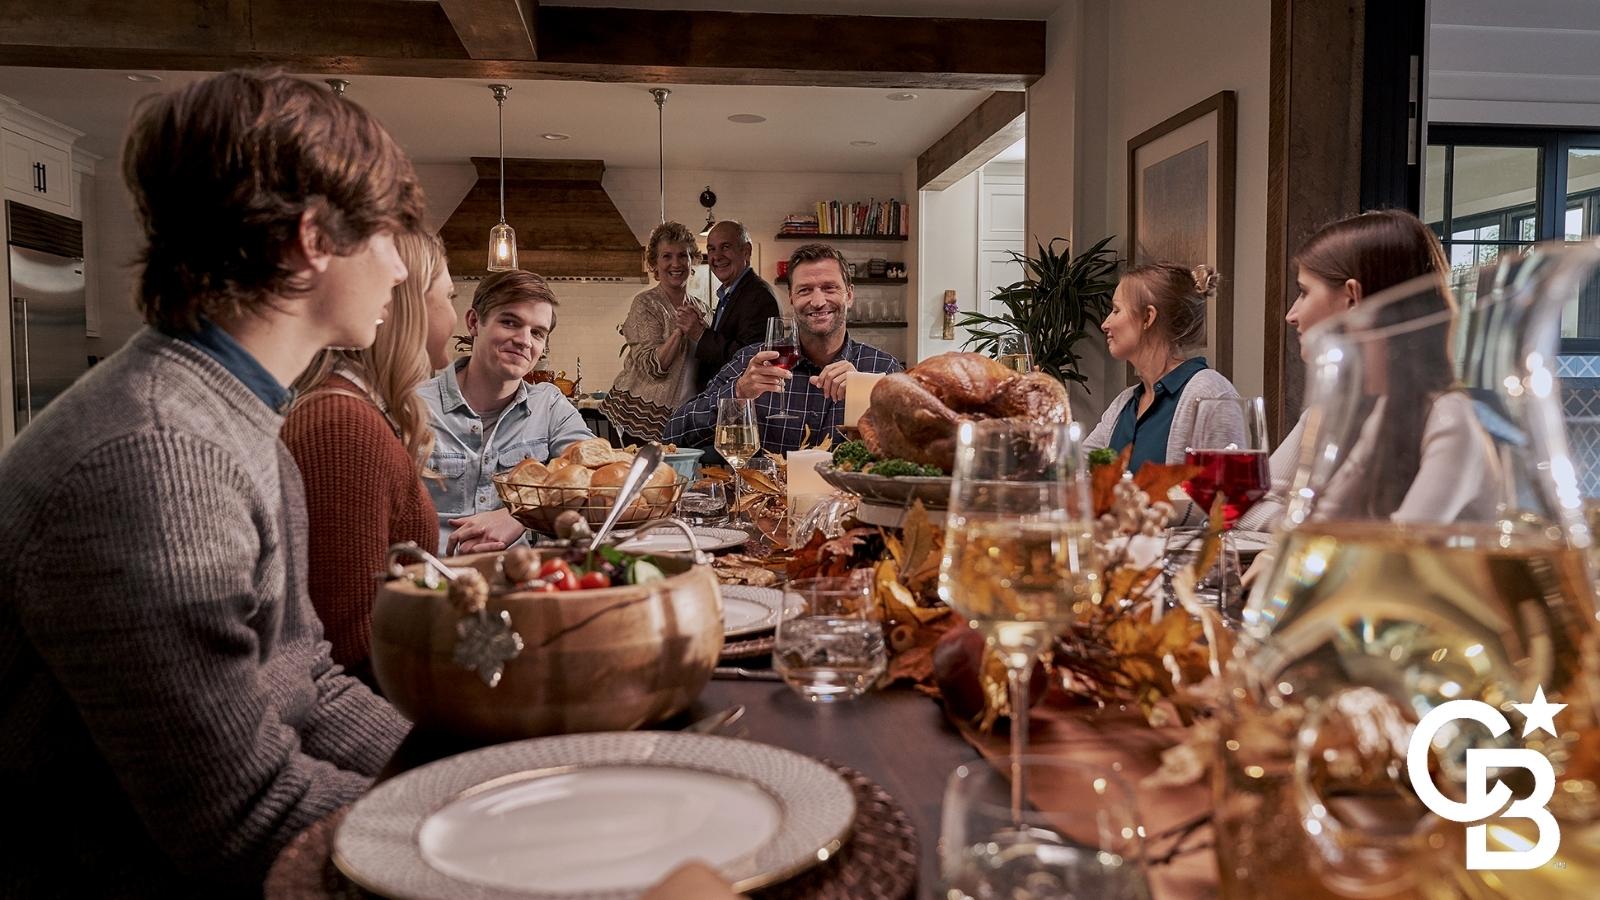 Family together at Thanksgiving dinner.